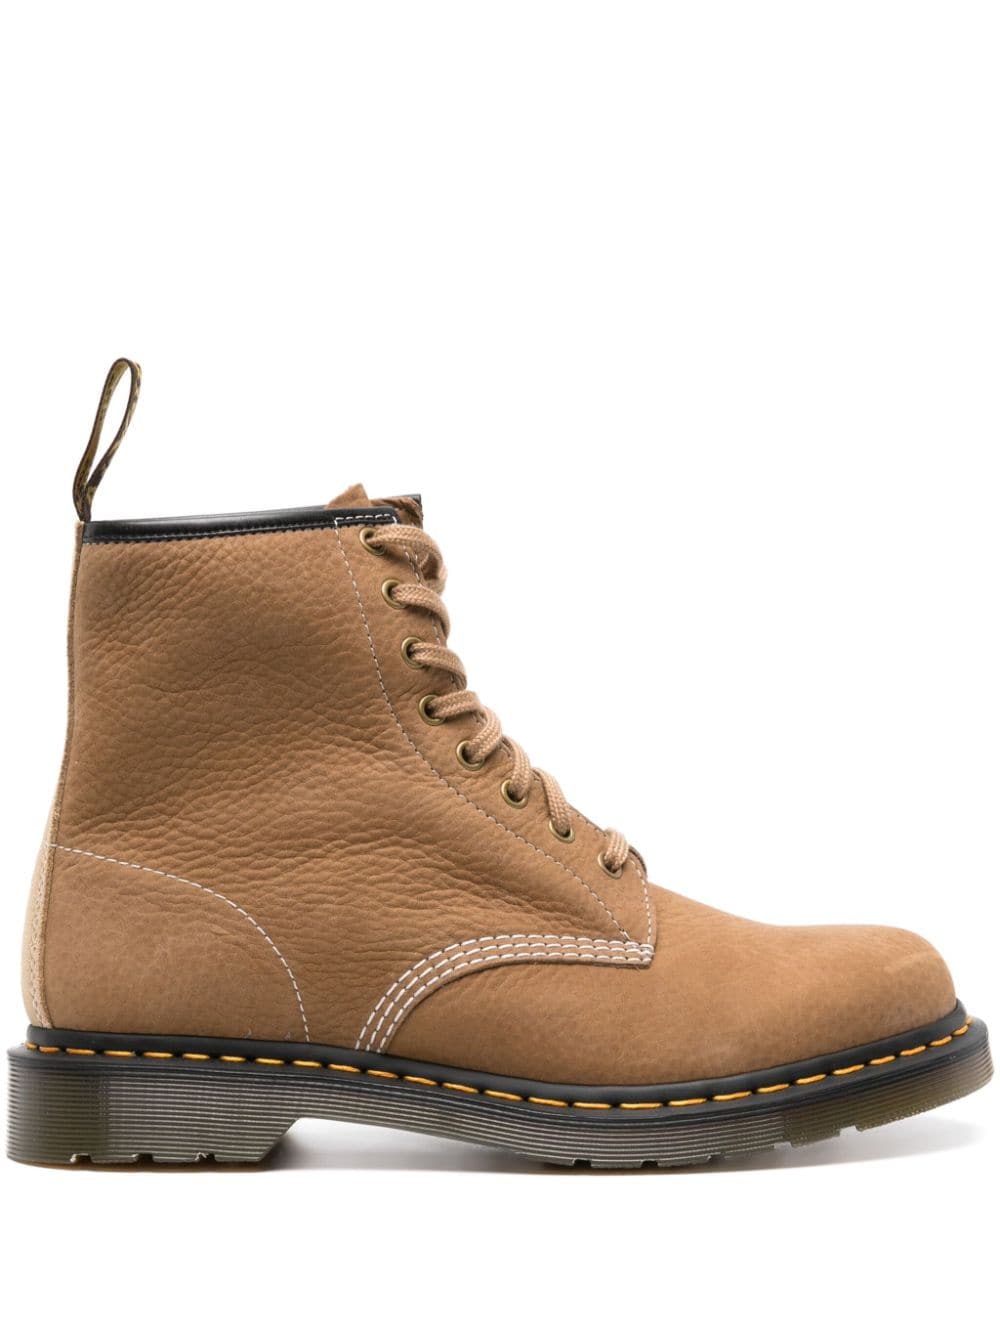 Dr. Martens' 1460 Nubuck Boots In 中性色